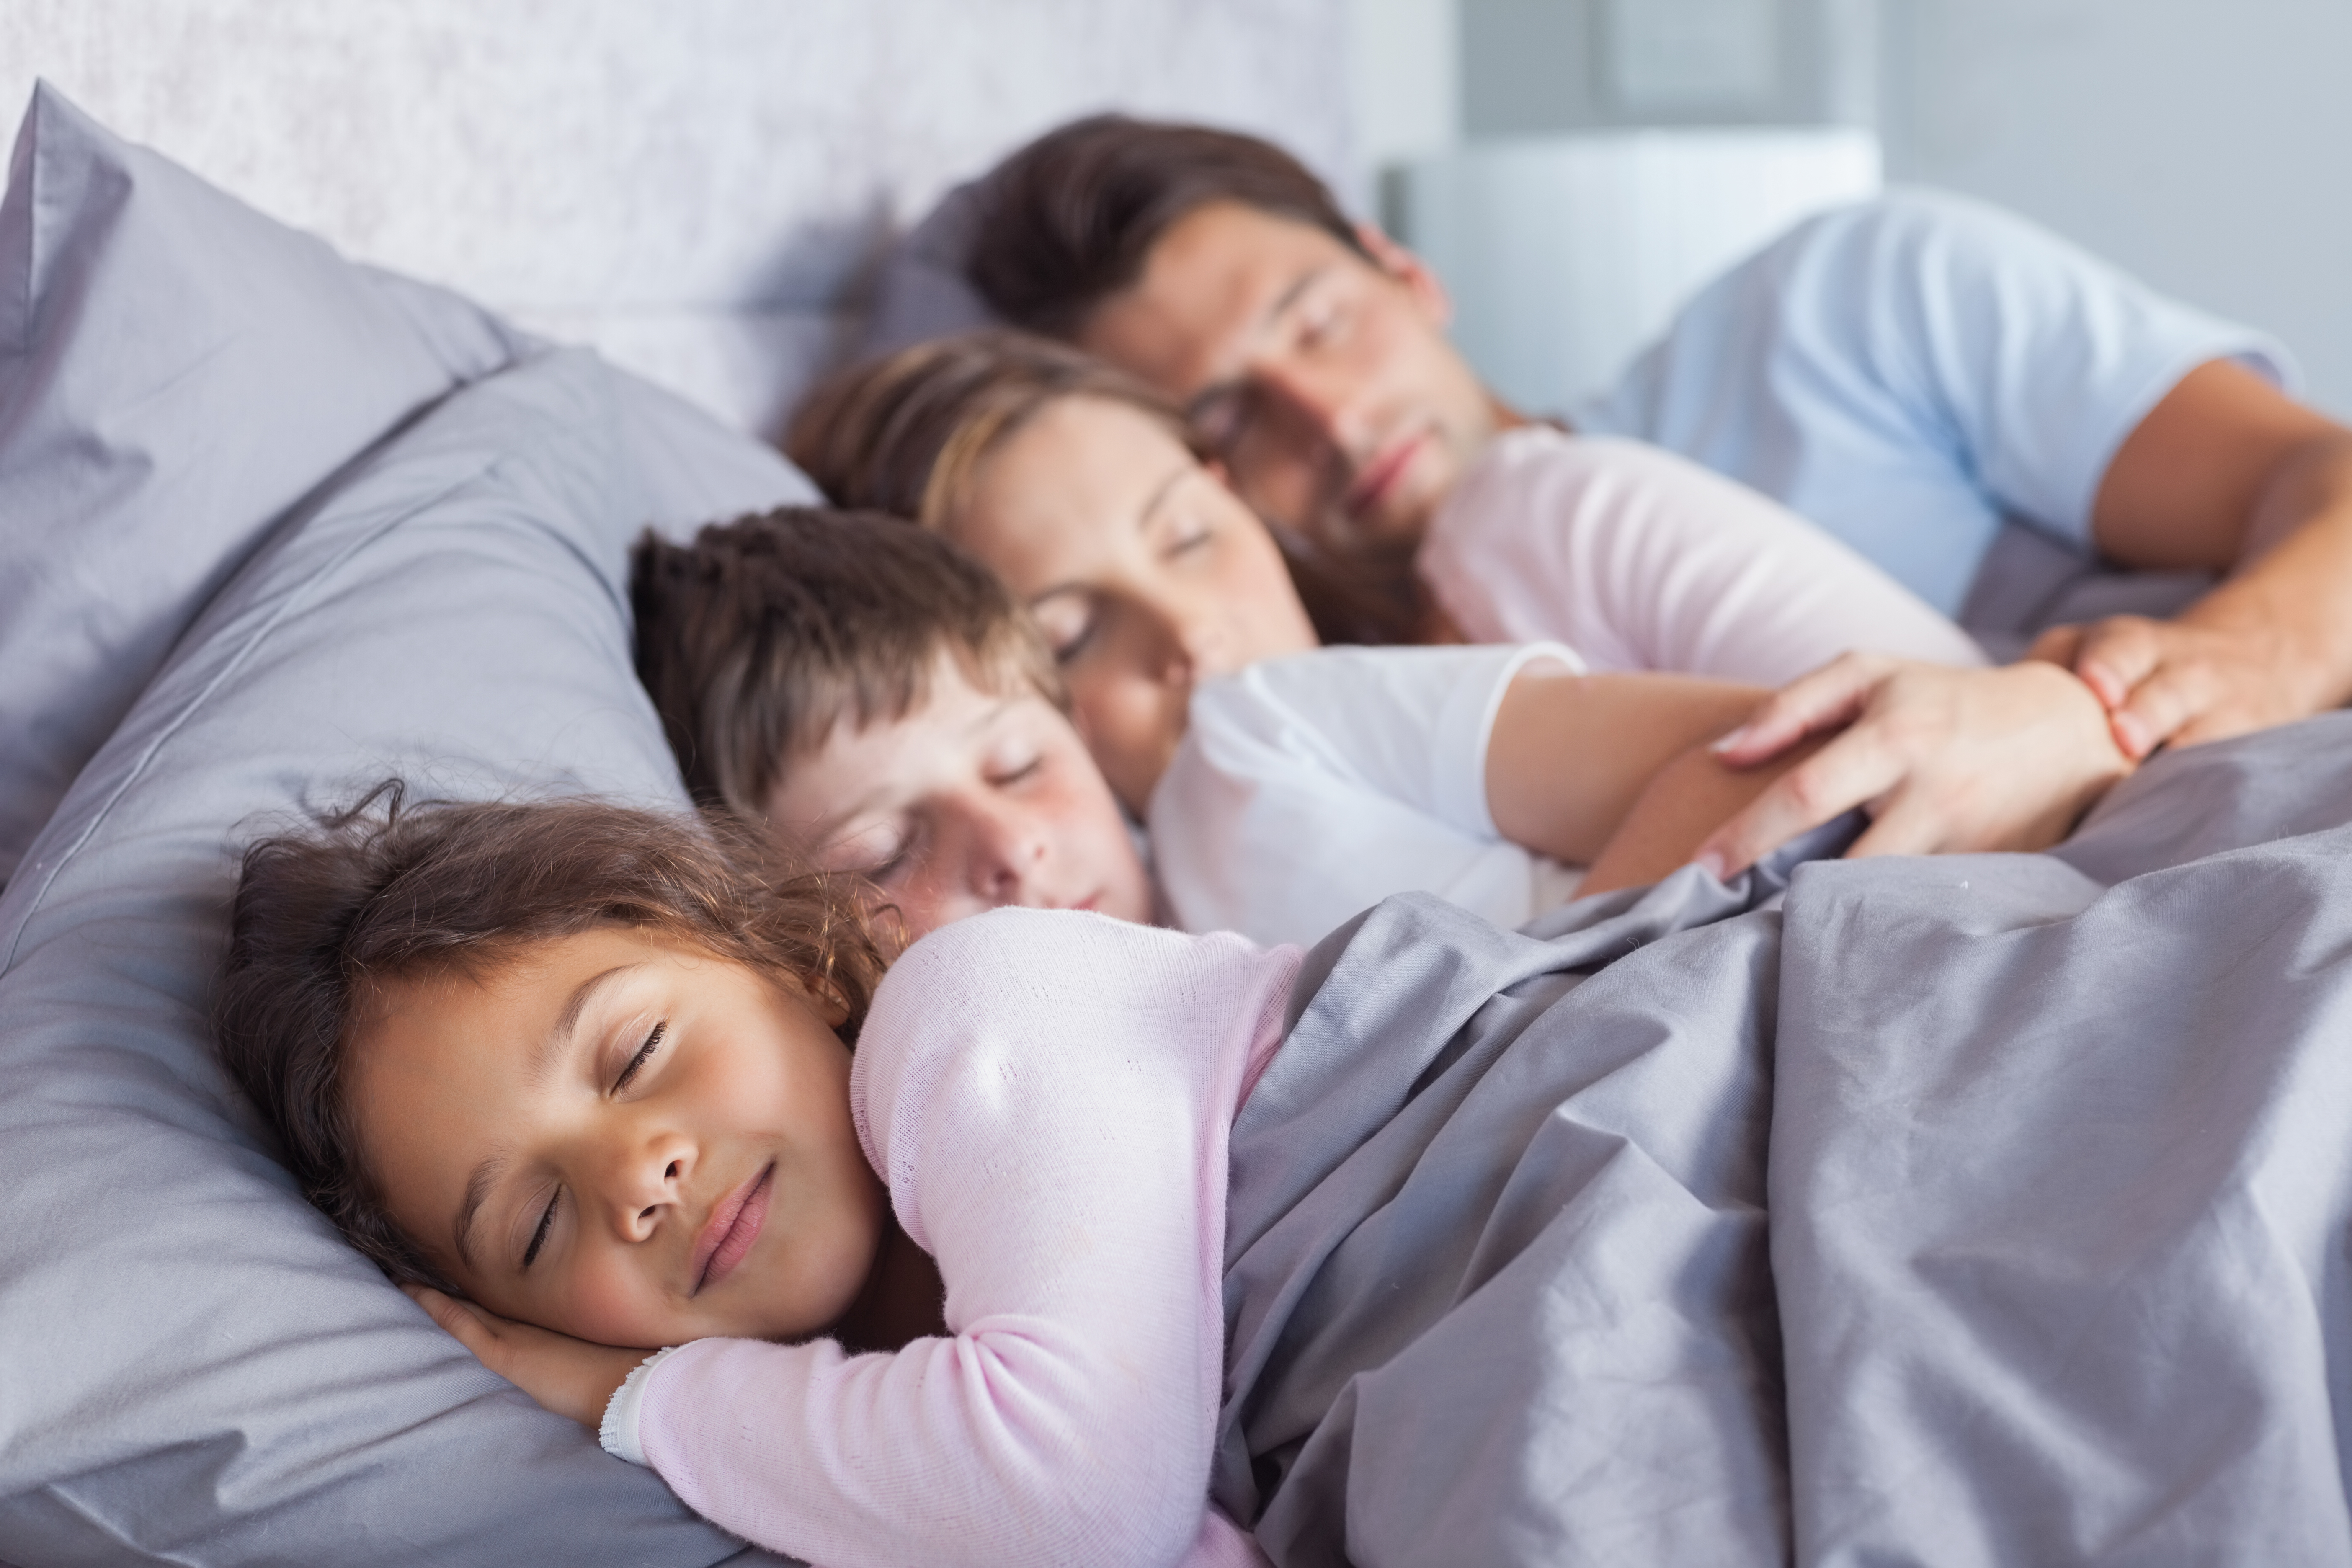 Cute family sleeping together in bed